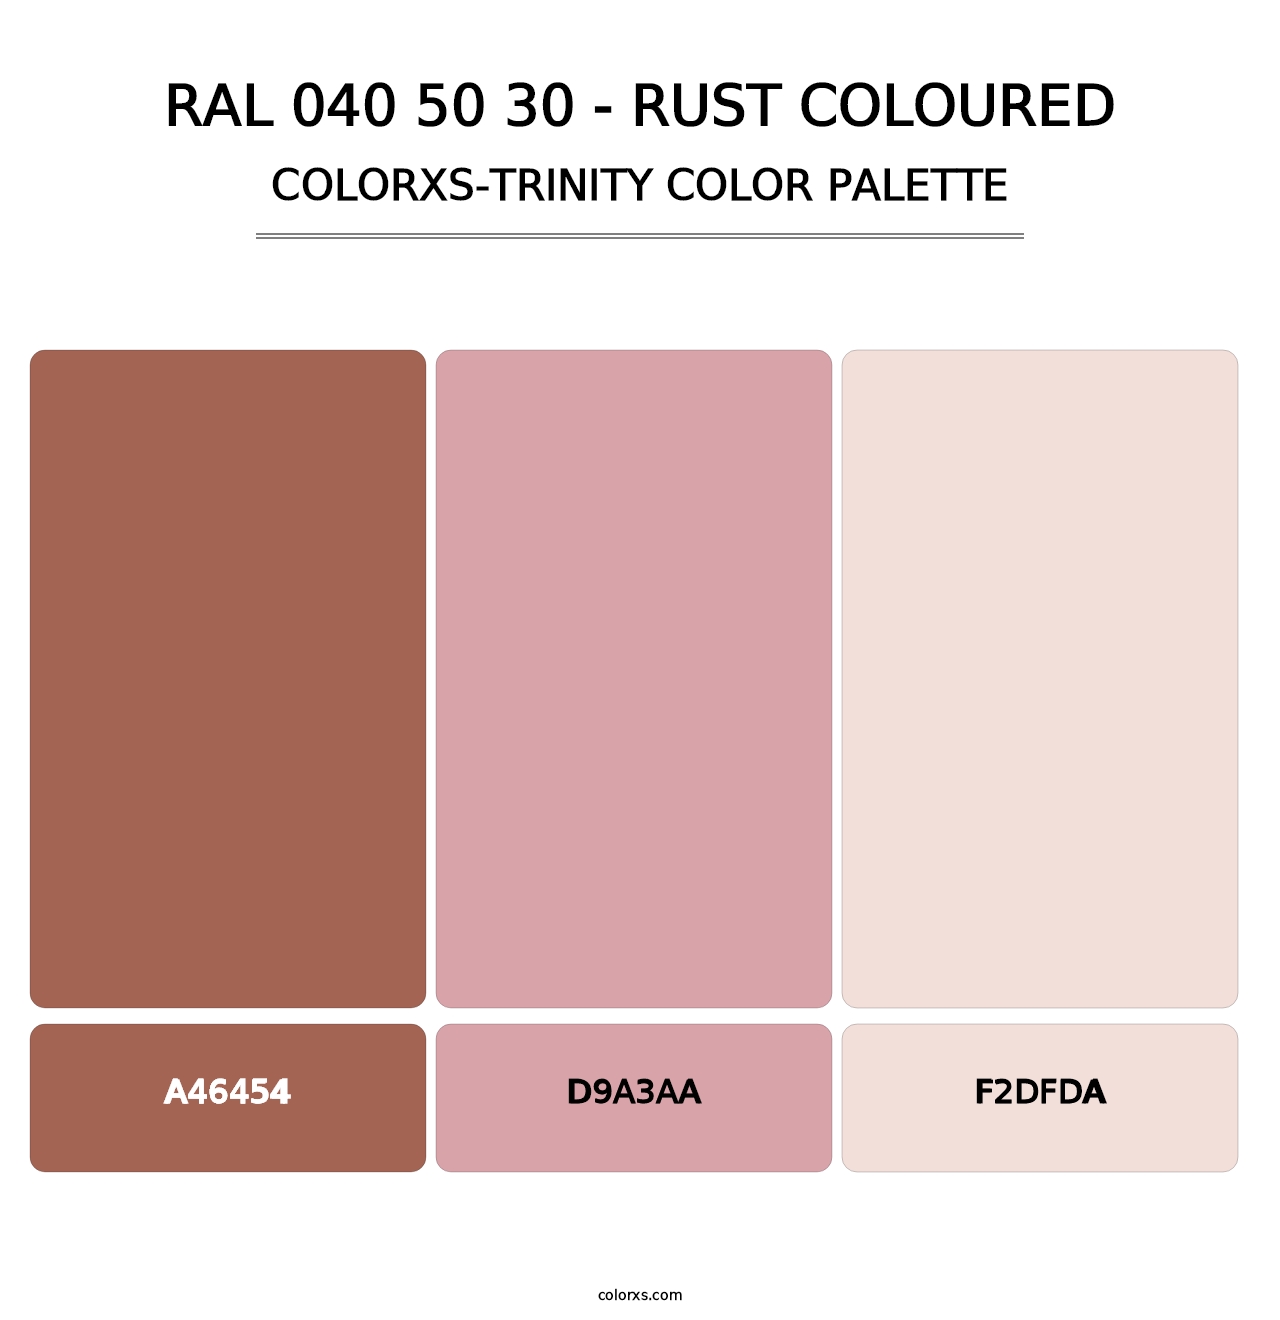 RAL 040 50 30 - Rust Coloured - Colorxs Trinity Palette